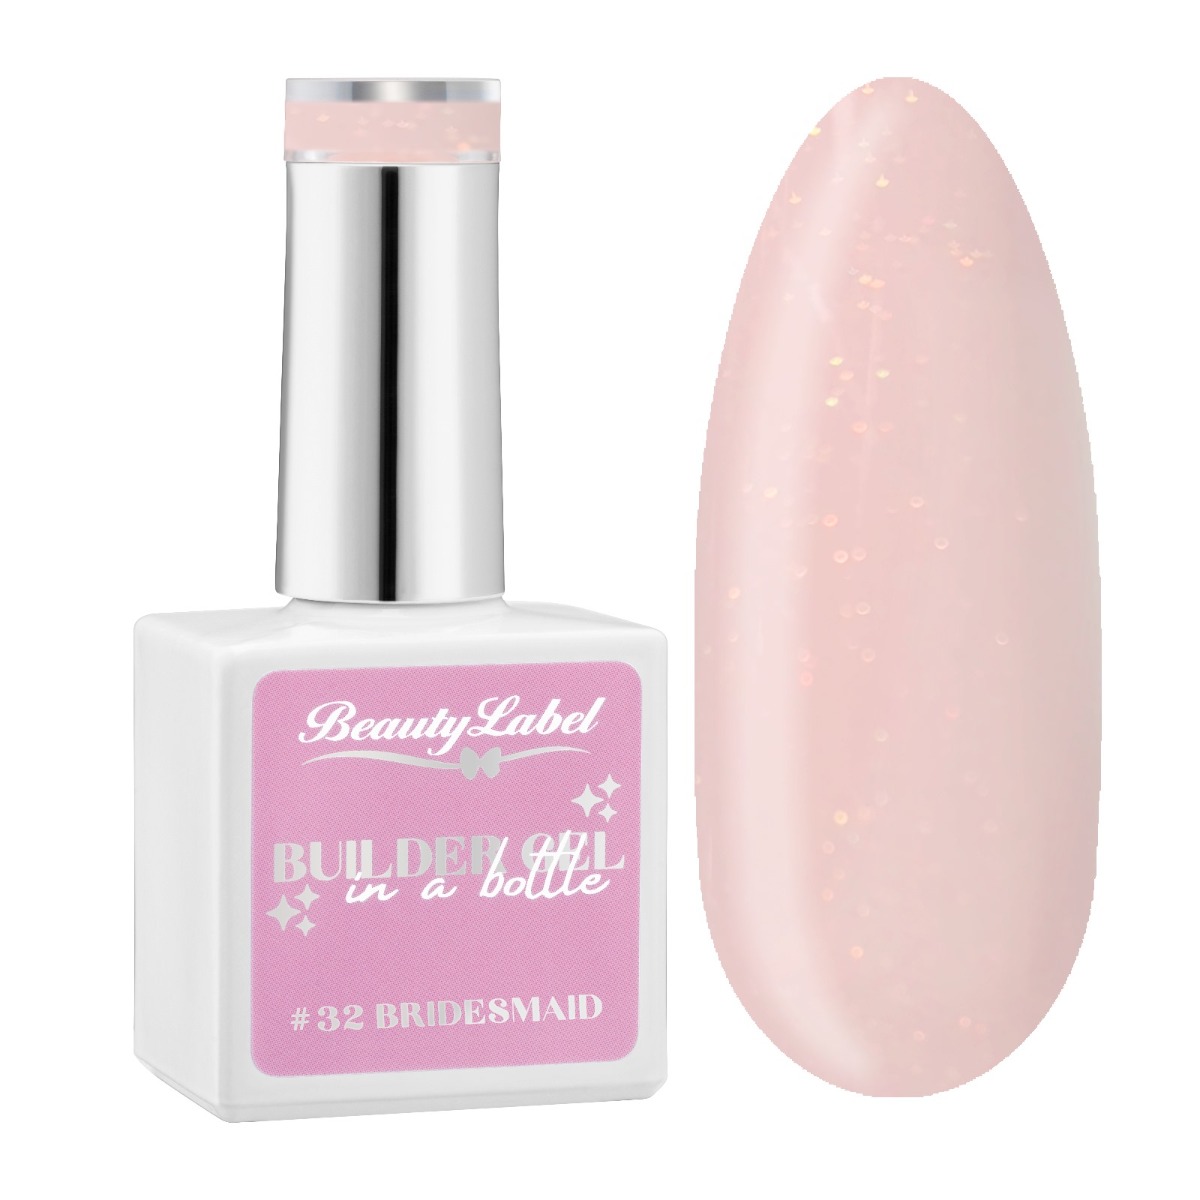 Beauty Label Builder in a bottle #32 Bridesmaid